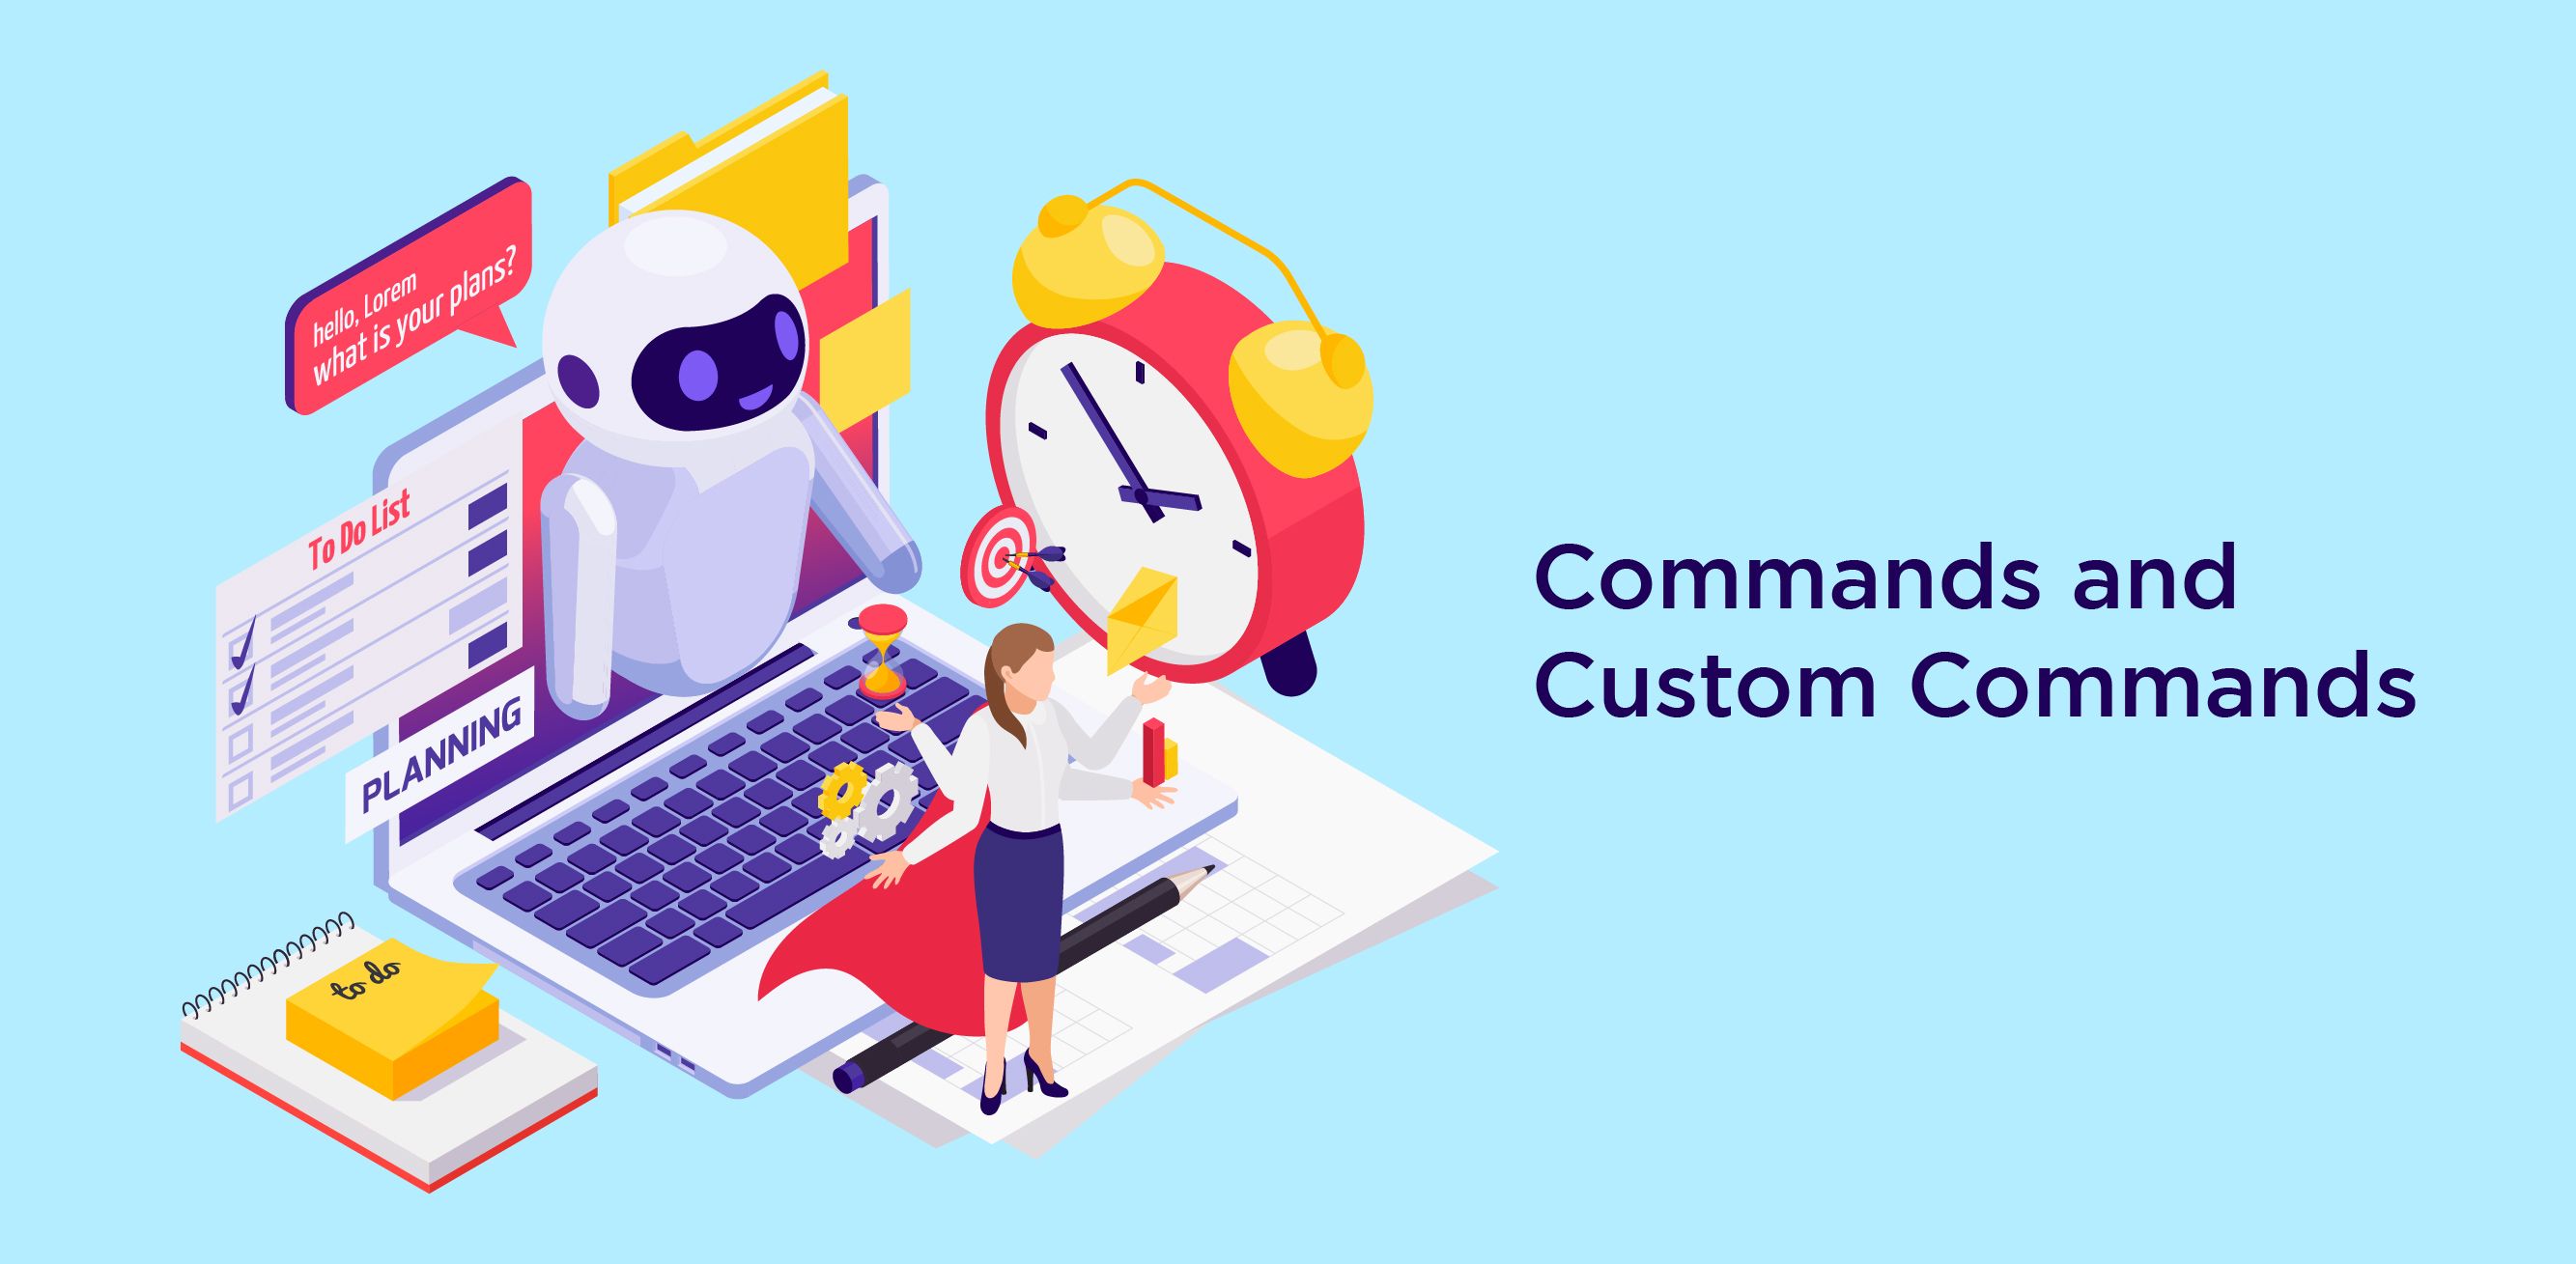 Commands and Custom Commands